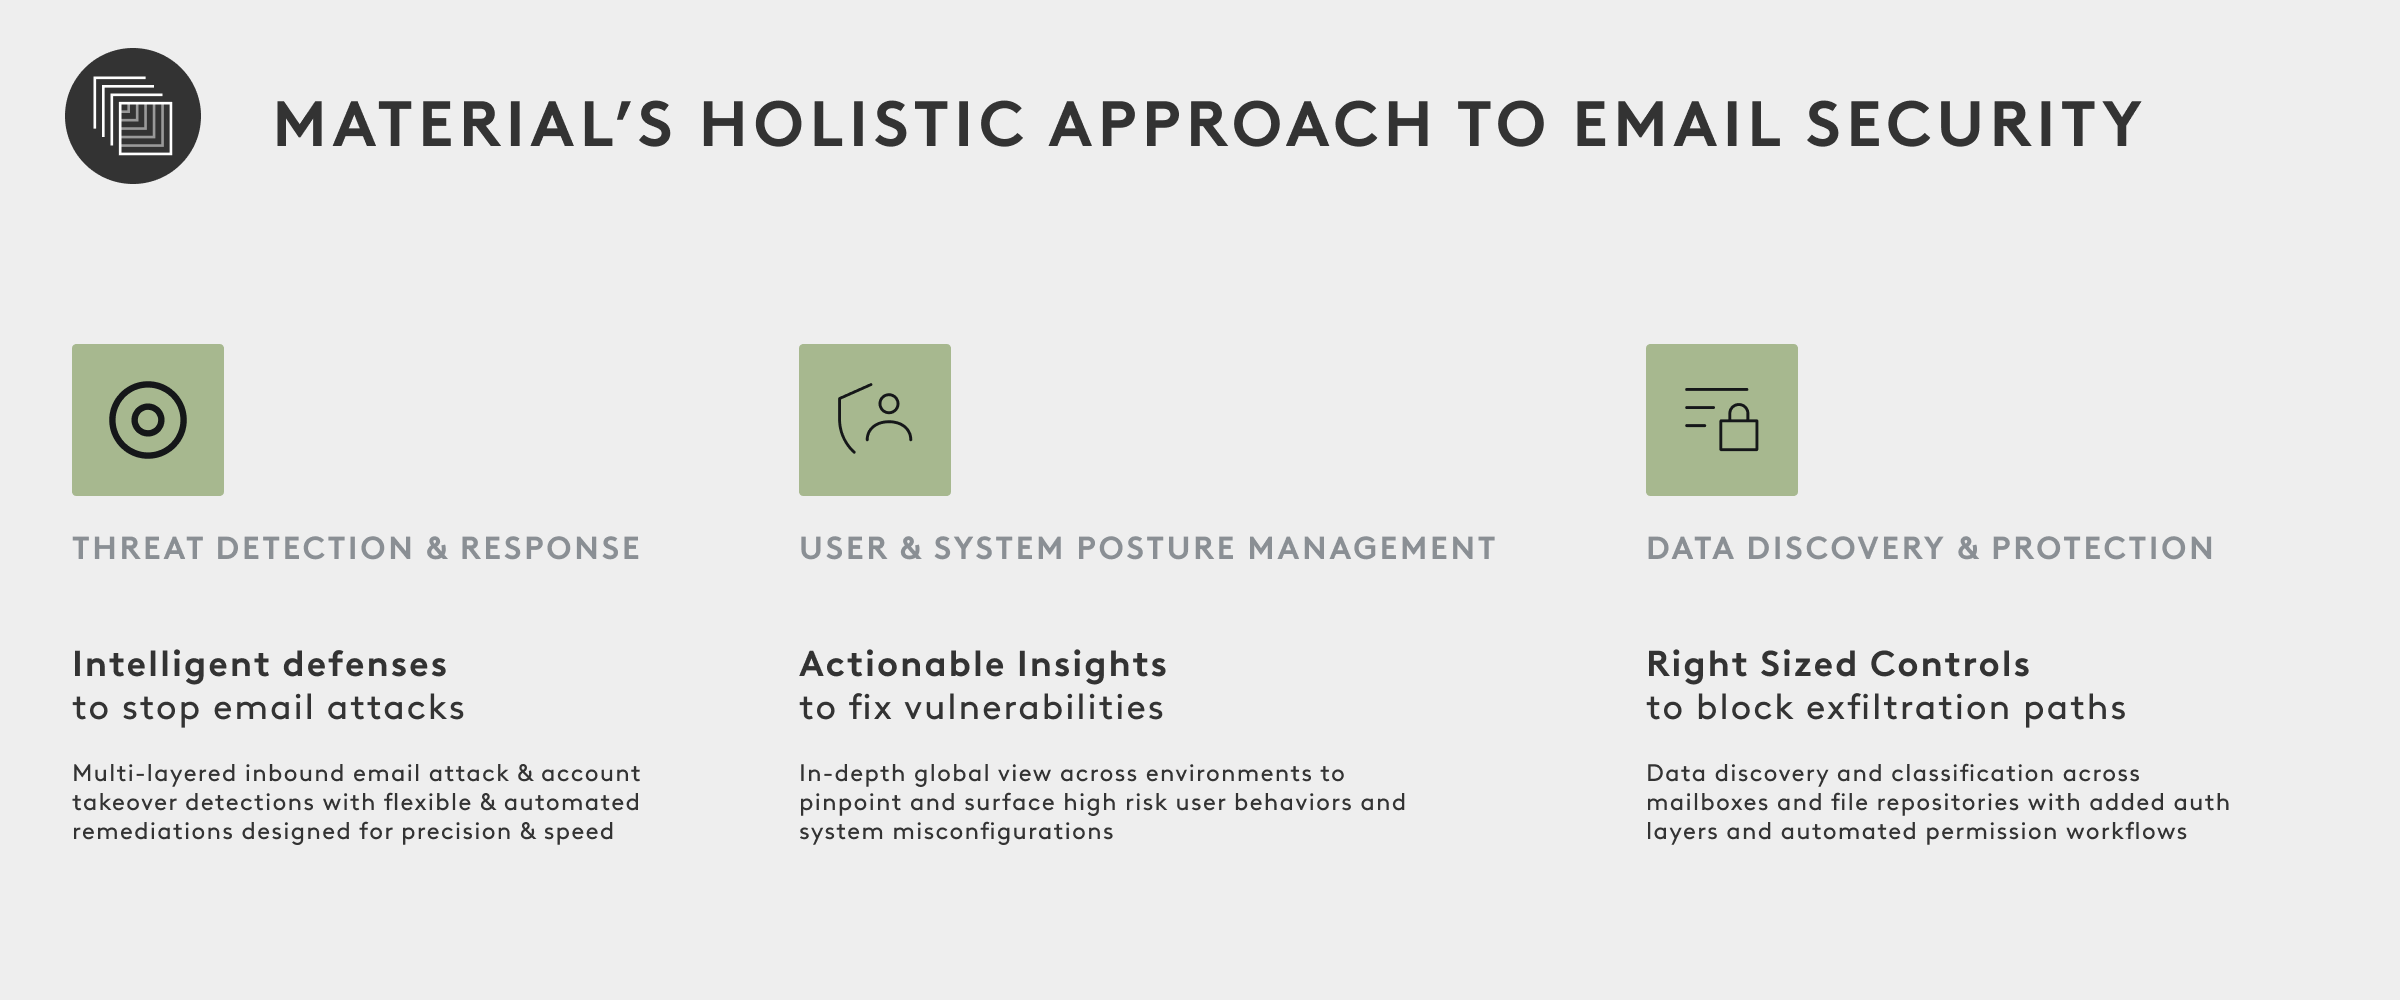 Material Security's holistic approach to email security